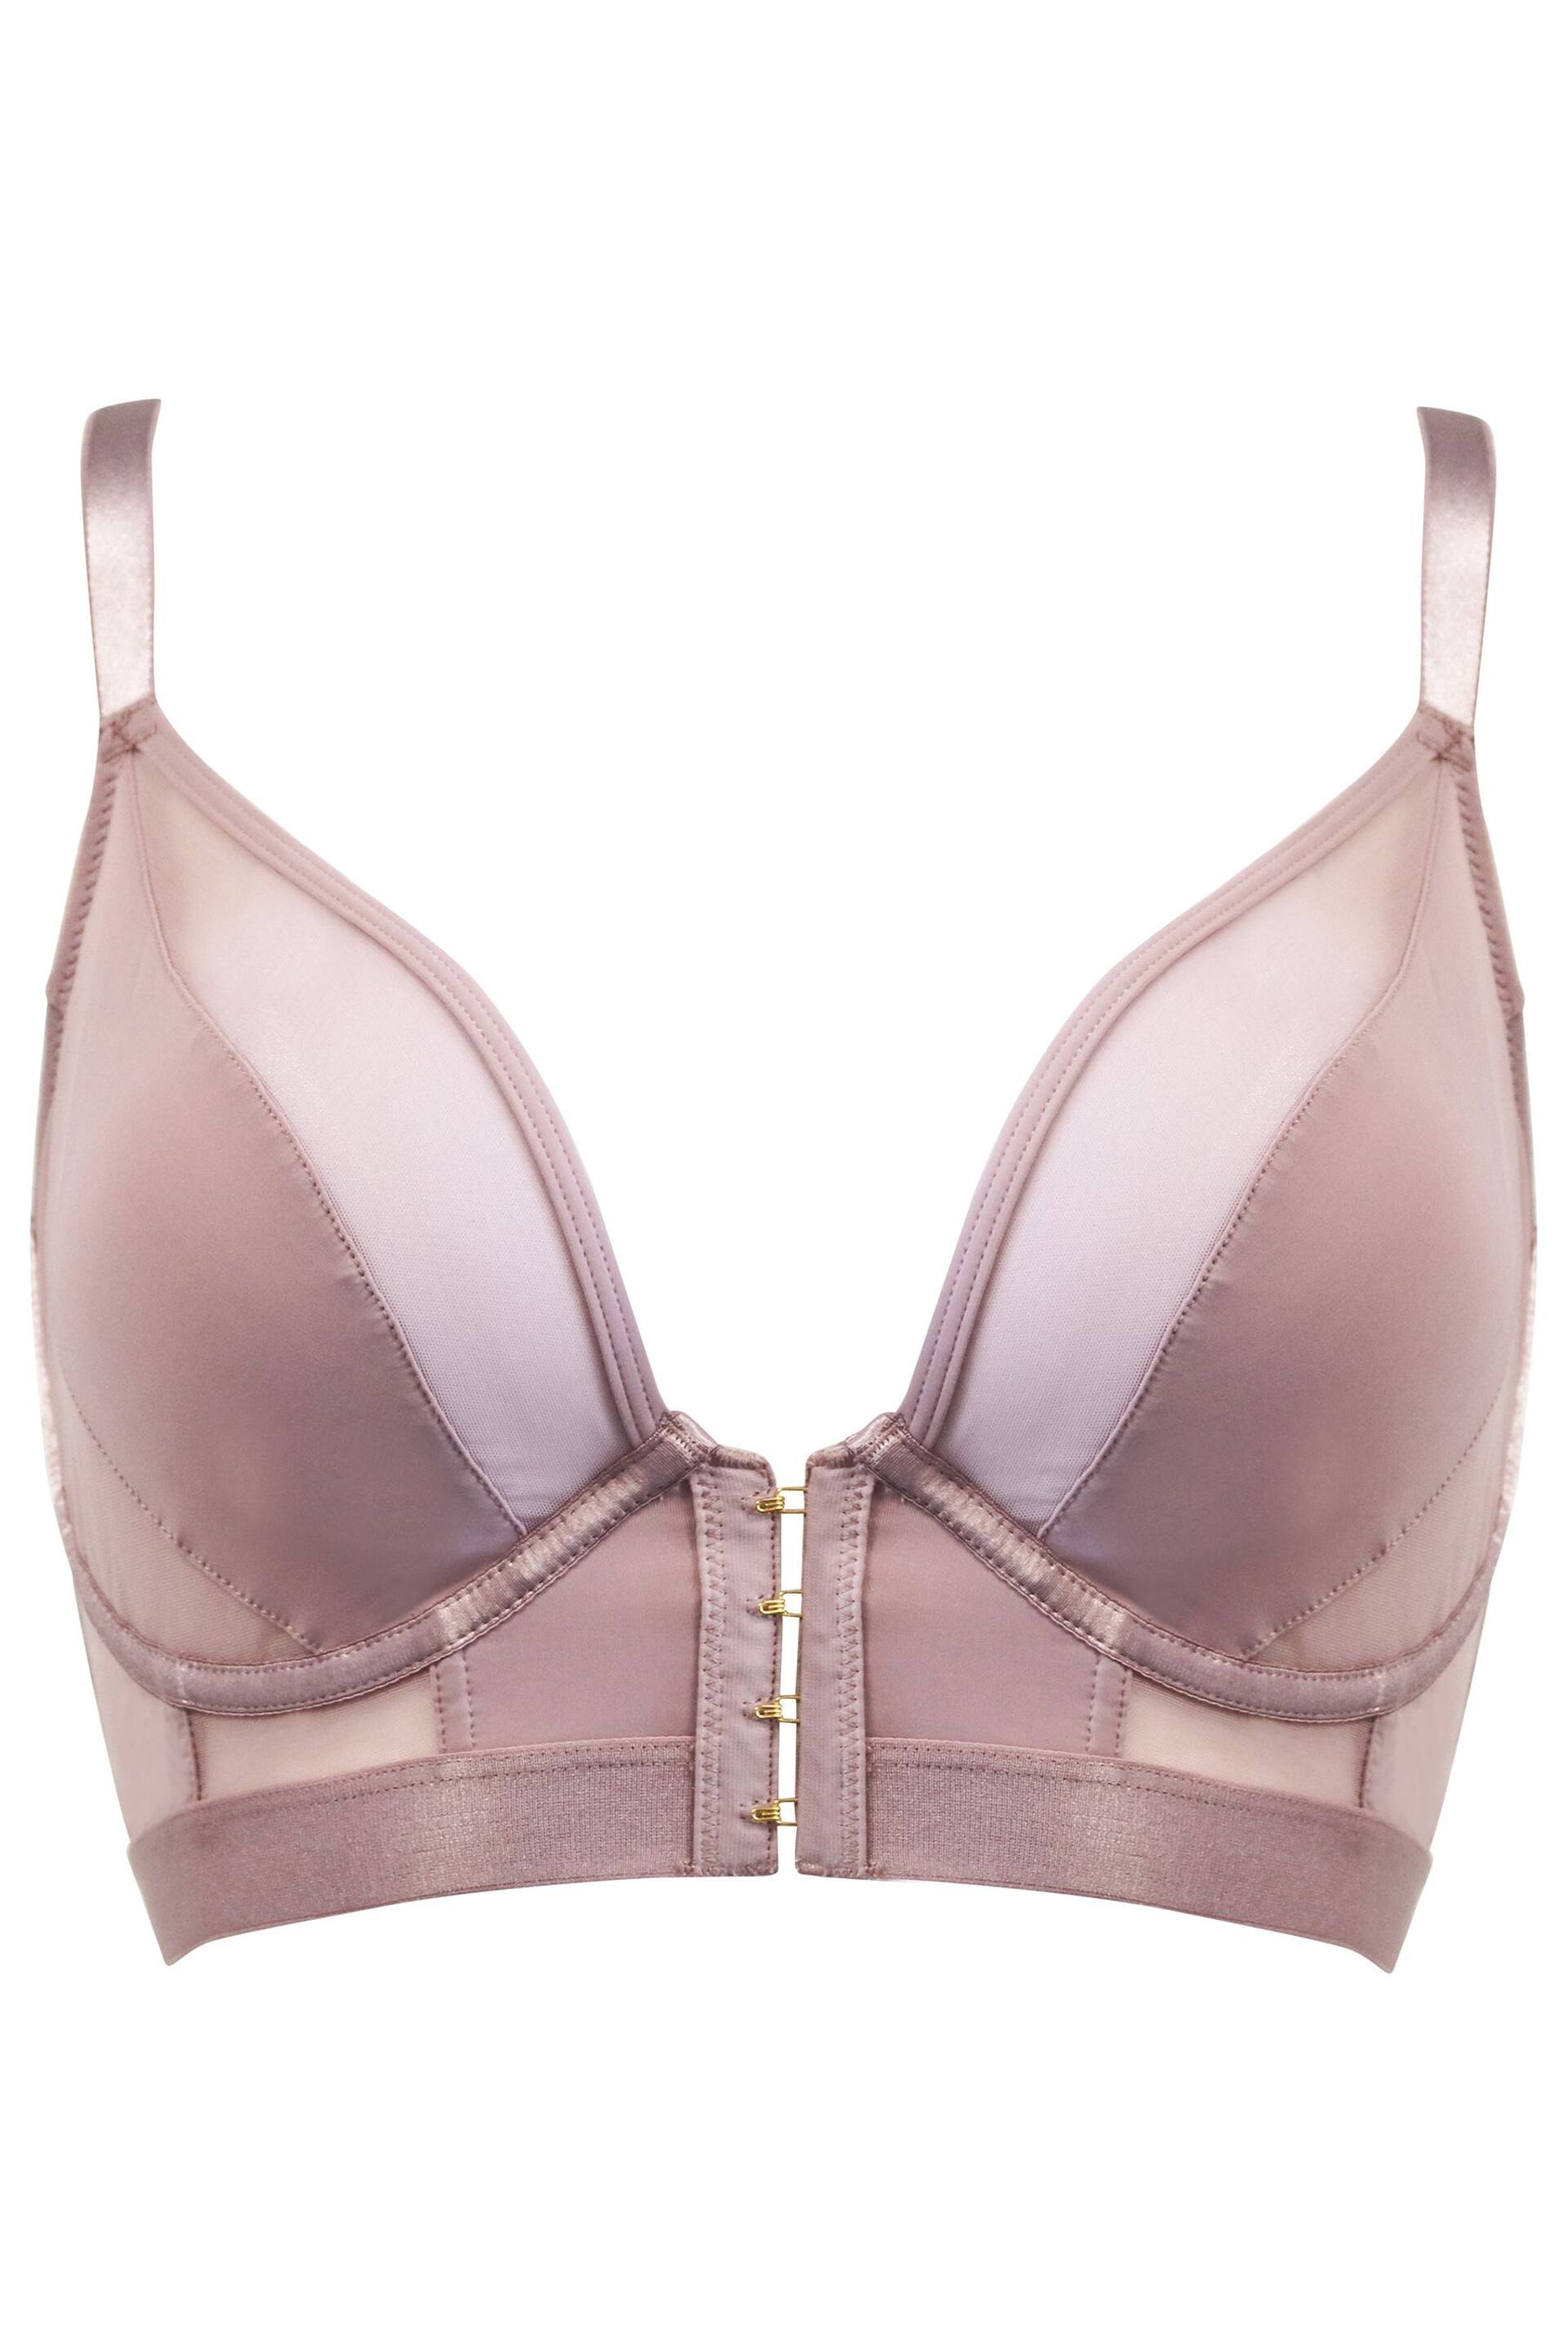 Pour Moi Rose Gold Bralette India Front Fastening Underwired Bralette - Image 3 of 4